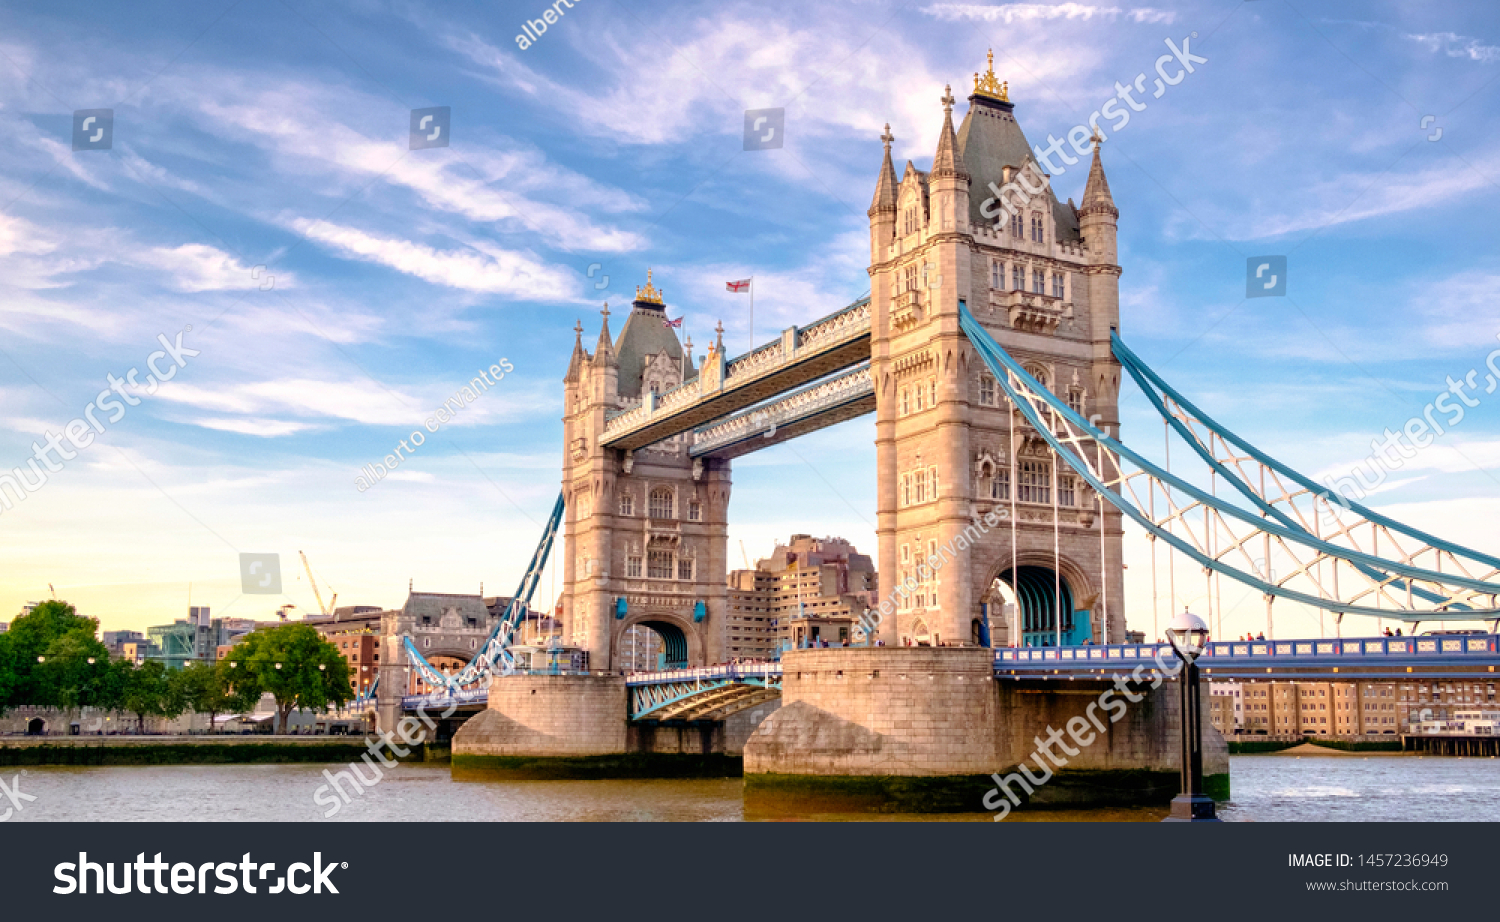 Iconic Tower Bridge connecting Londong with Southwark on the Thames River